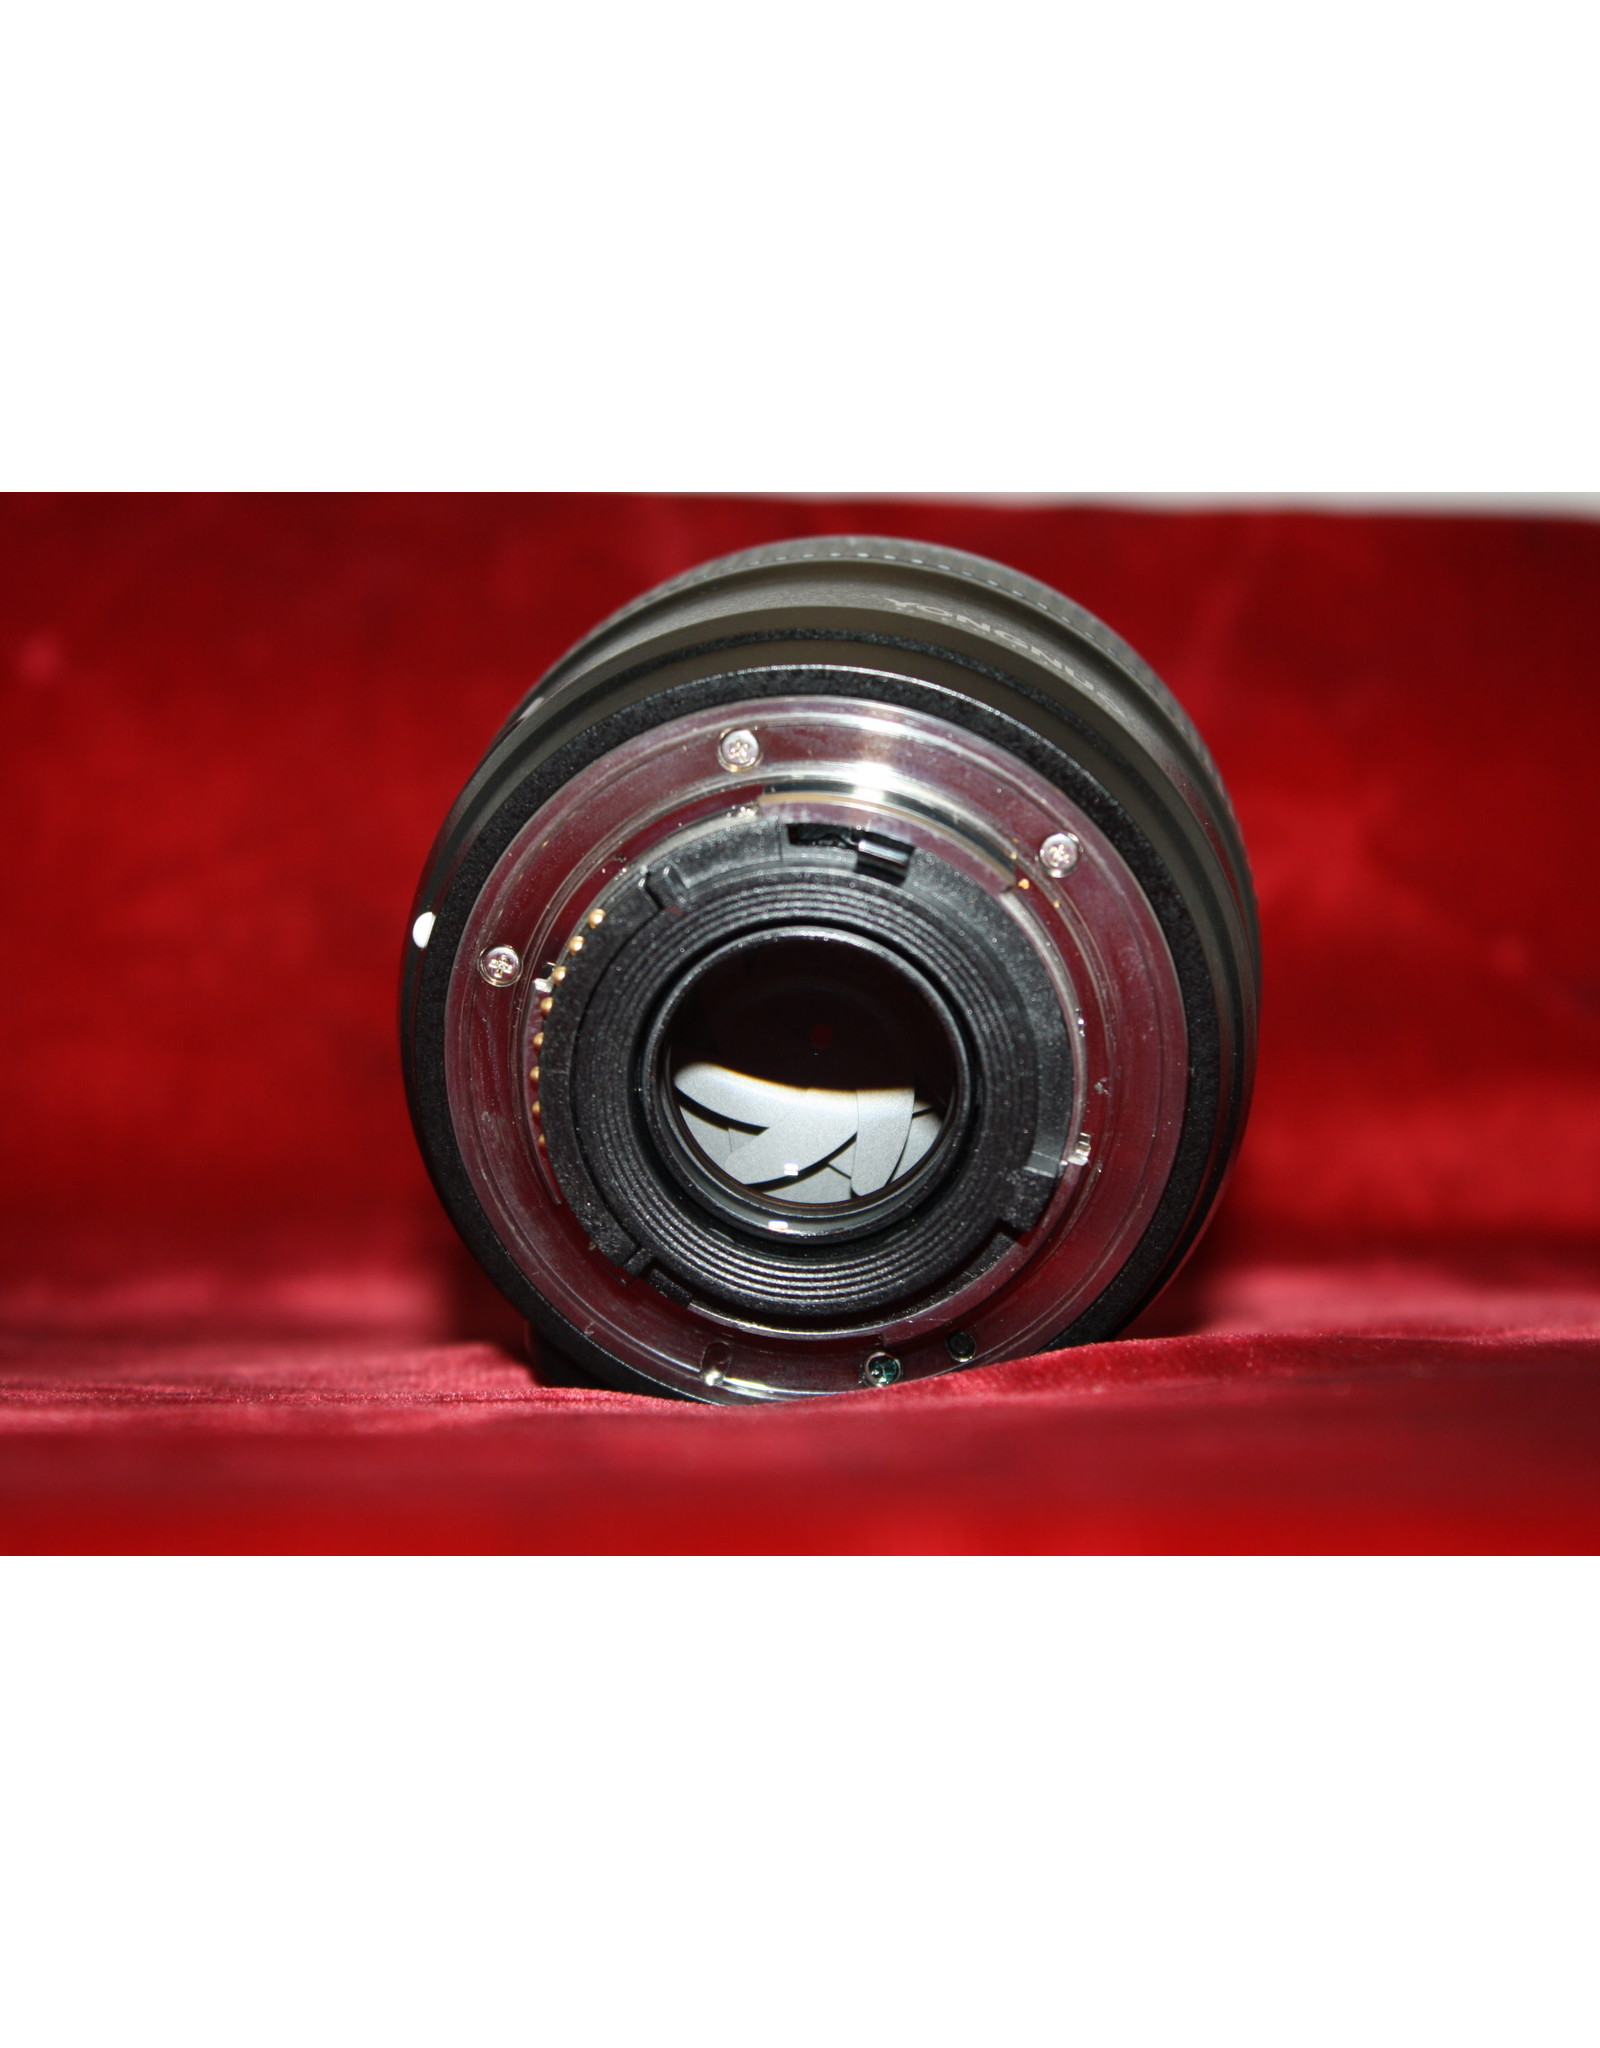 Yongnuo YN 35mm F2 AF/MF Wide-Angle Auto Focus Lens For Nikon F Mount Camera (Pre-owned)